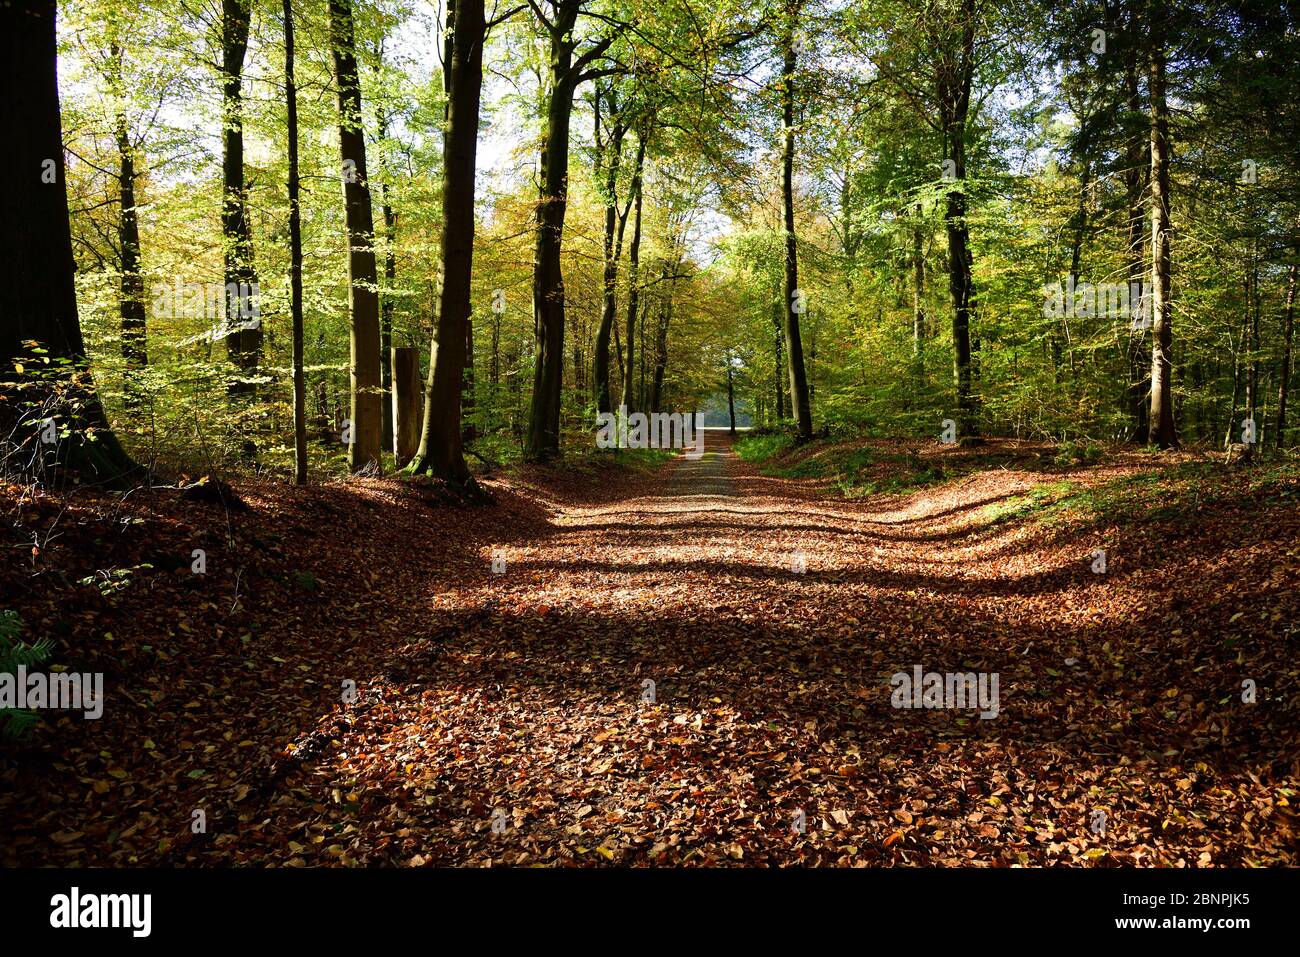 Europe, Germany, Lower Saxony, forest, autumn, deciduous tree, back light, forest path, Stock Photo